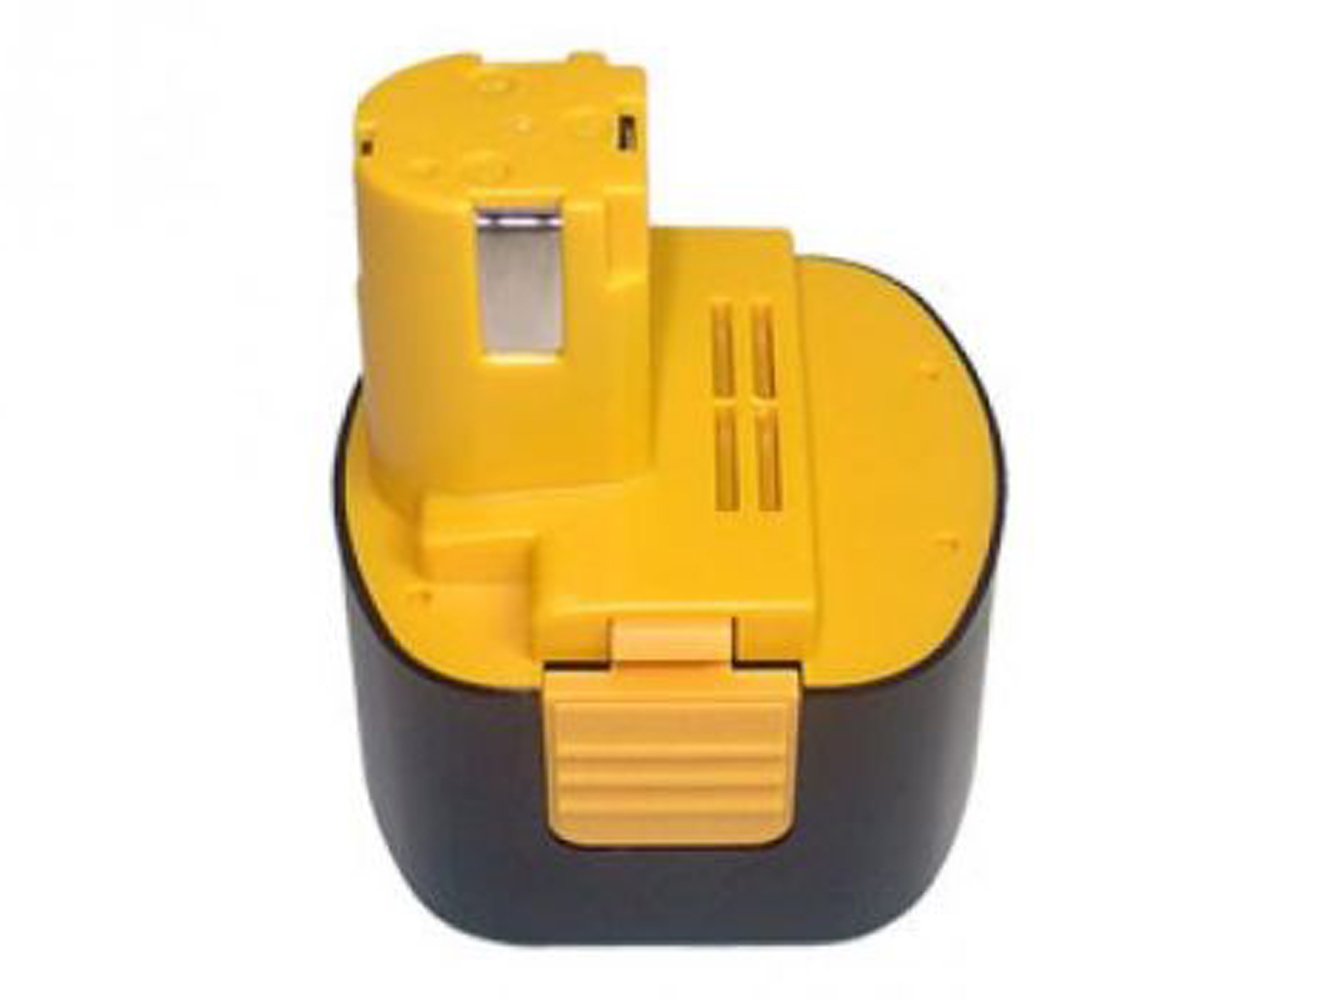 Remplacement compatible pour batterie d'outils PANASONIC EY6181CQK, EY6181CRKW, EY6181EQKW, EY6188CRKW, EY6780